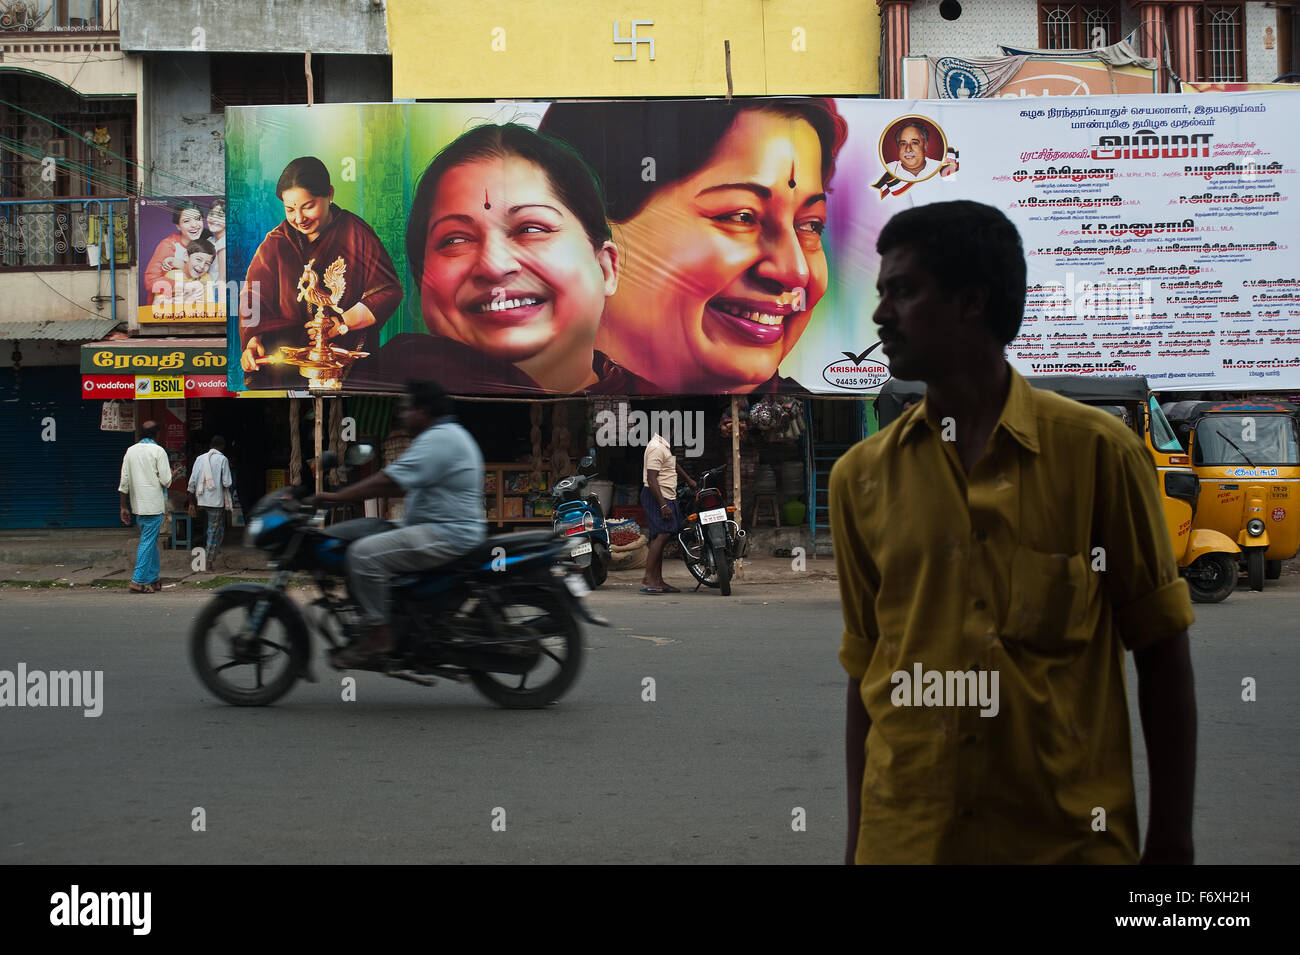 Billboard representing Jayalalithaa, a female Indian politician, at the time of an election ( India) Stock Photo